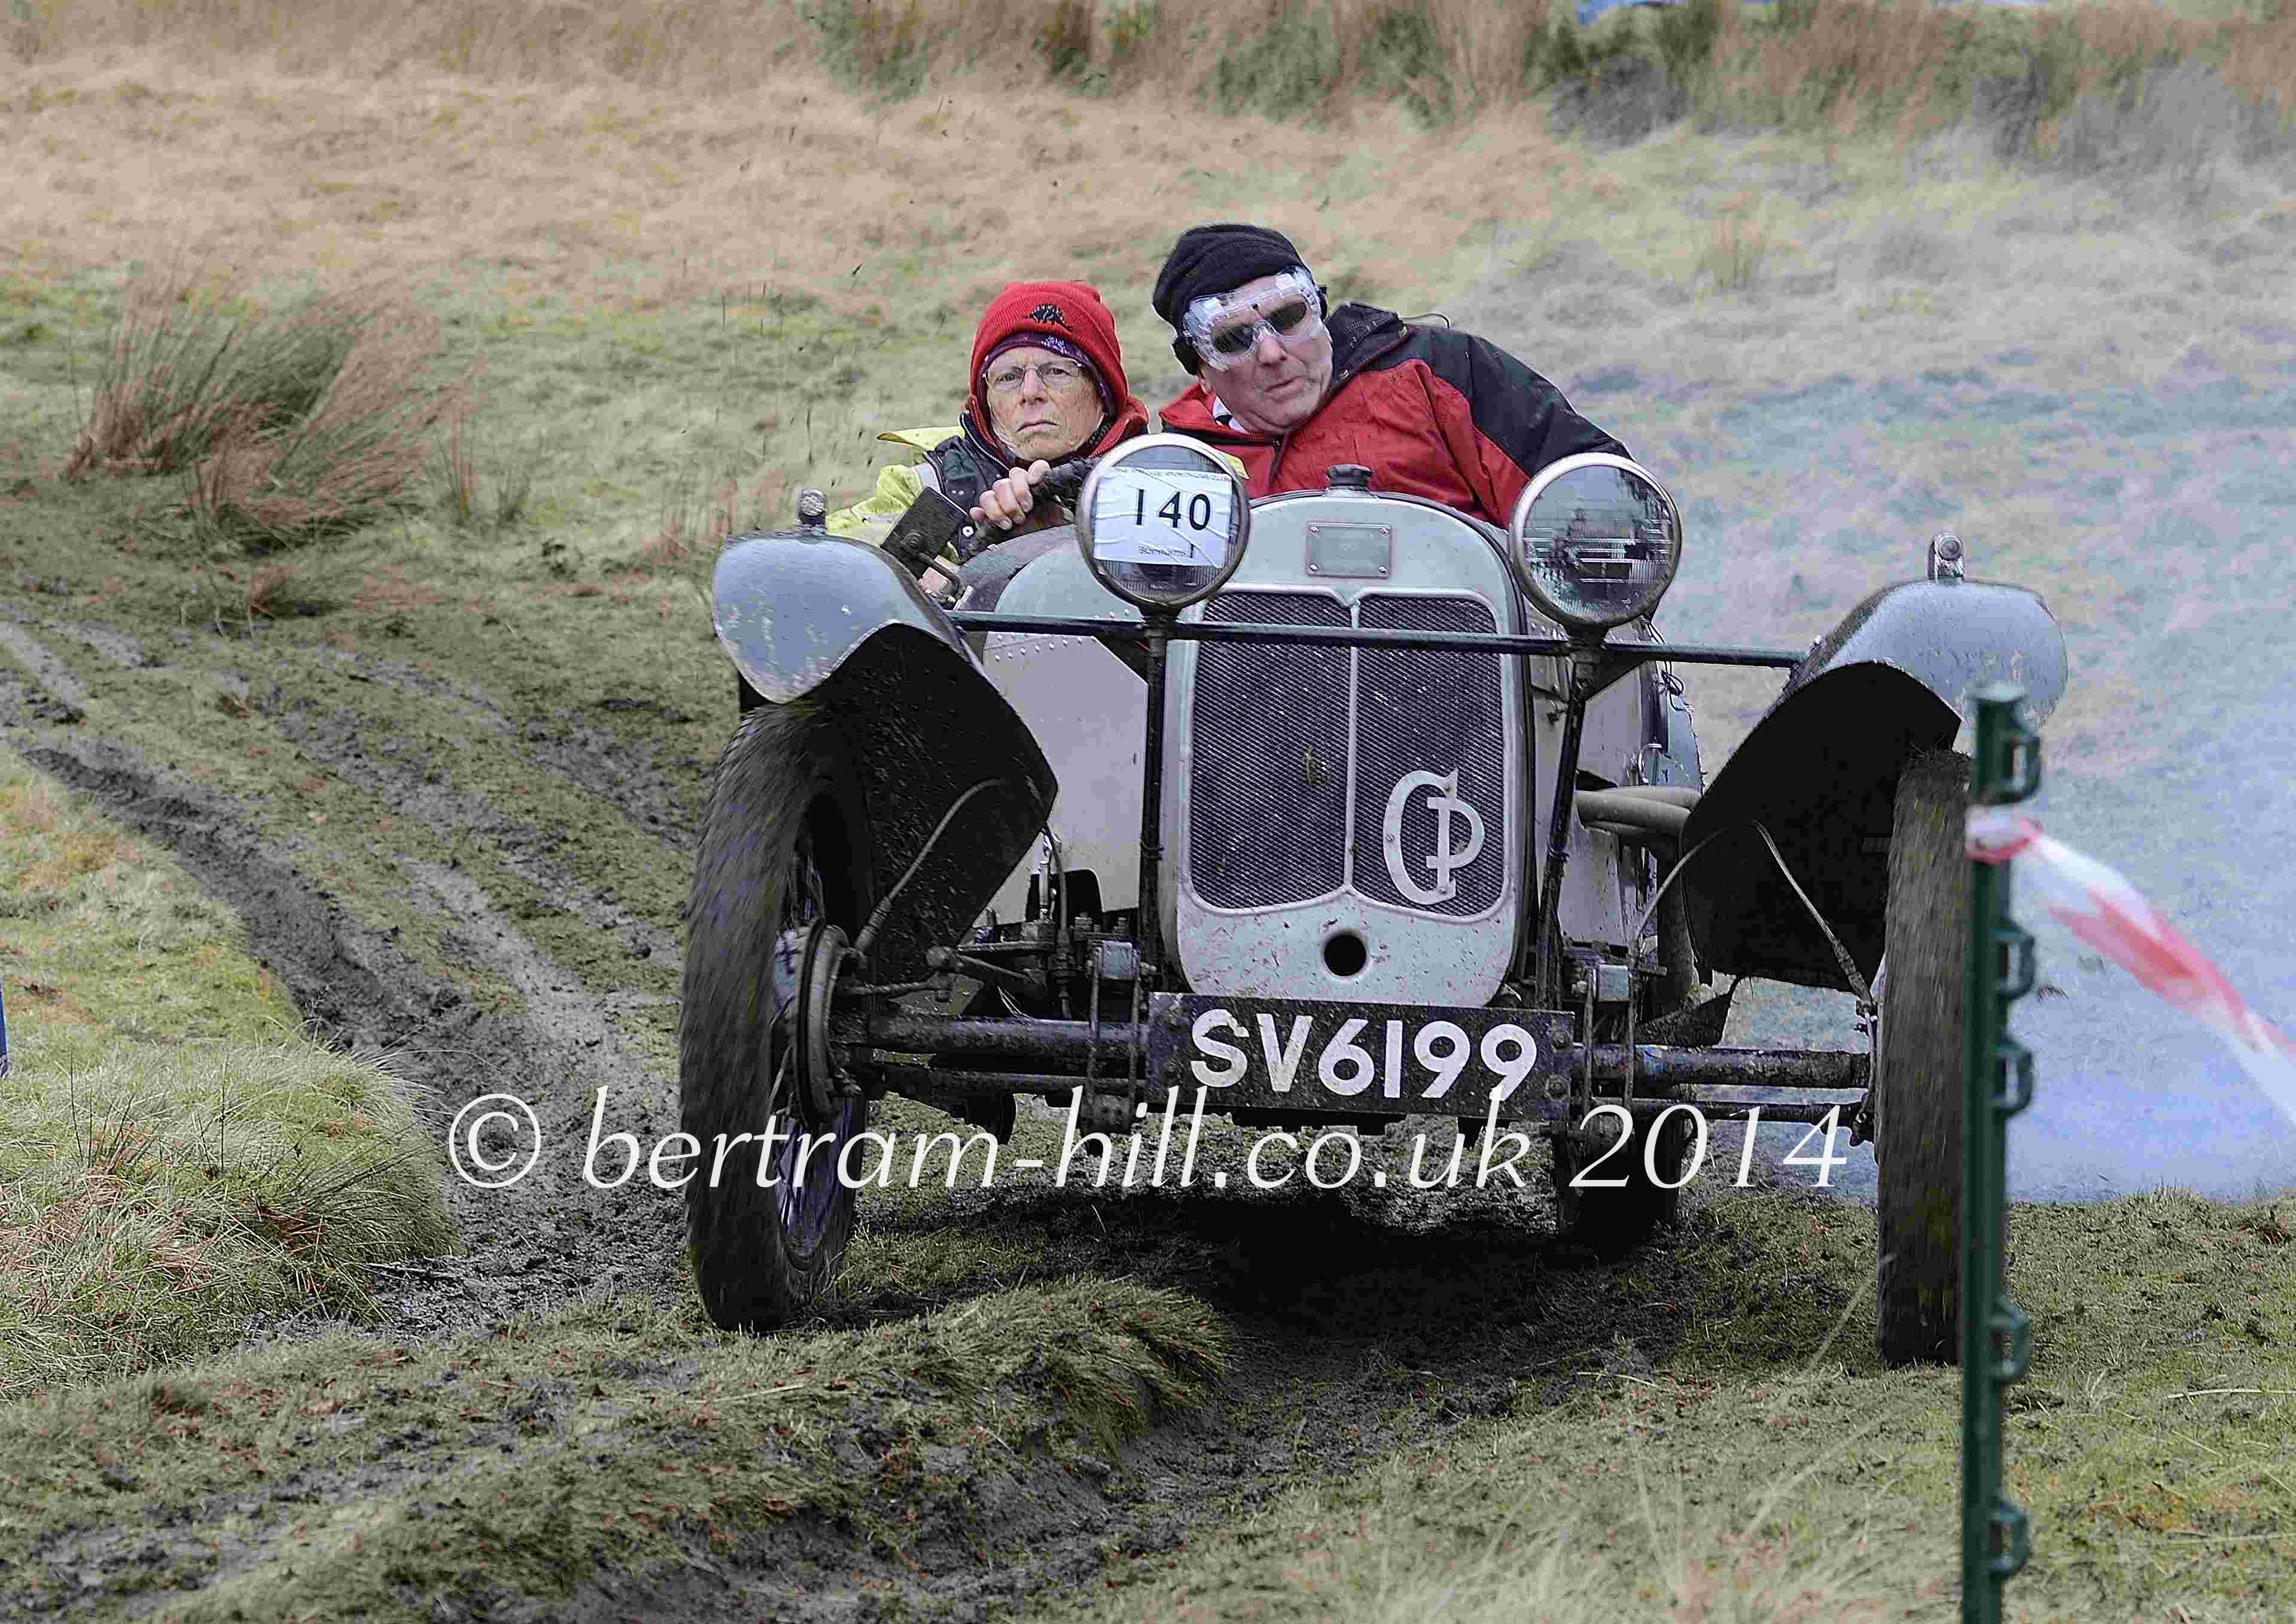 The VSCC go ‘north of the border’ for the Scottish Trial this weekend cover